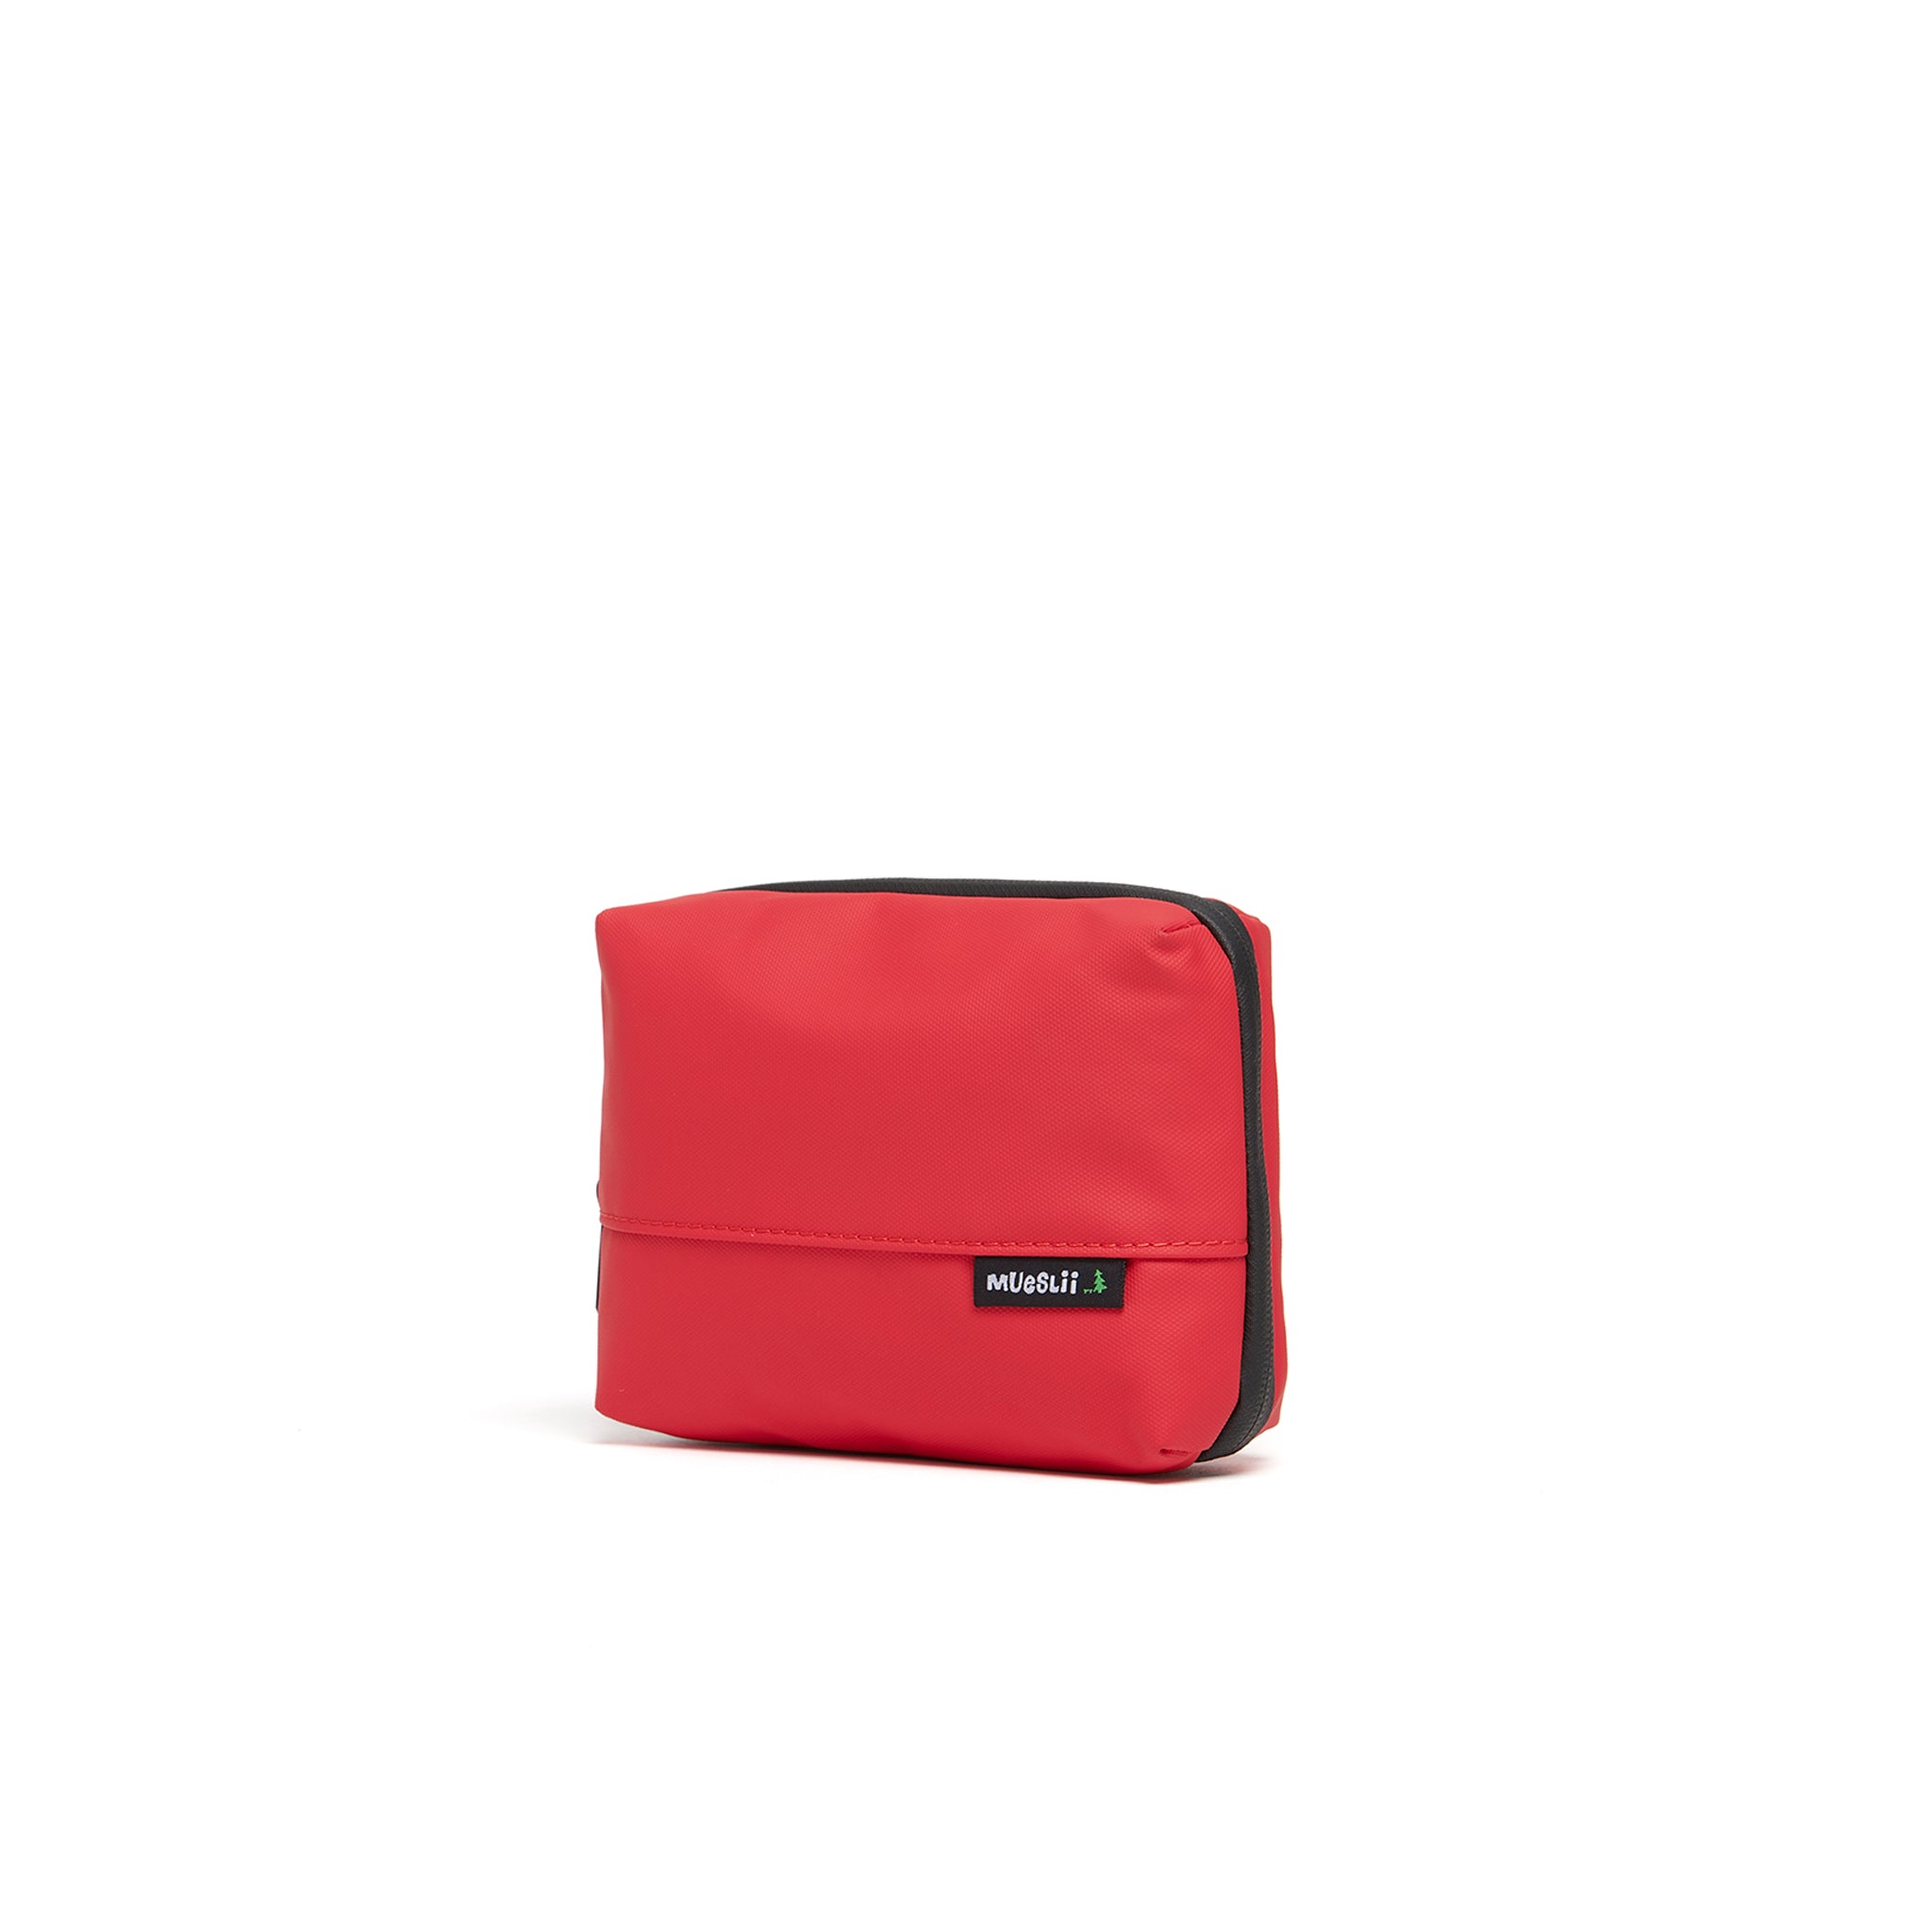 Mueslii tech case, made of PU coated waterproof nylon, color coral red, side view.